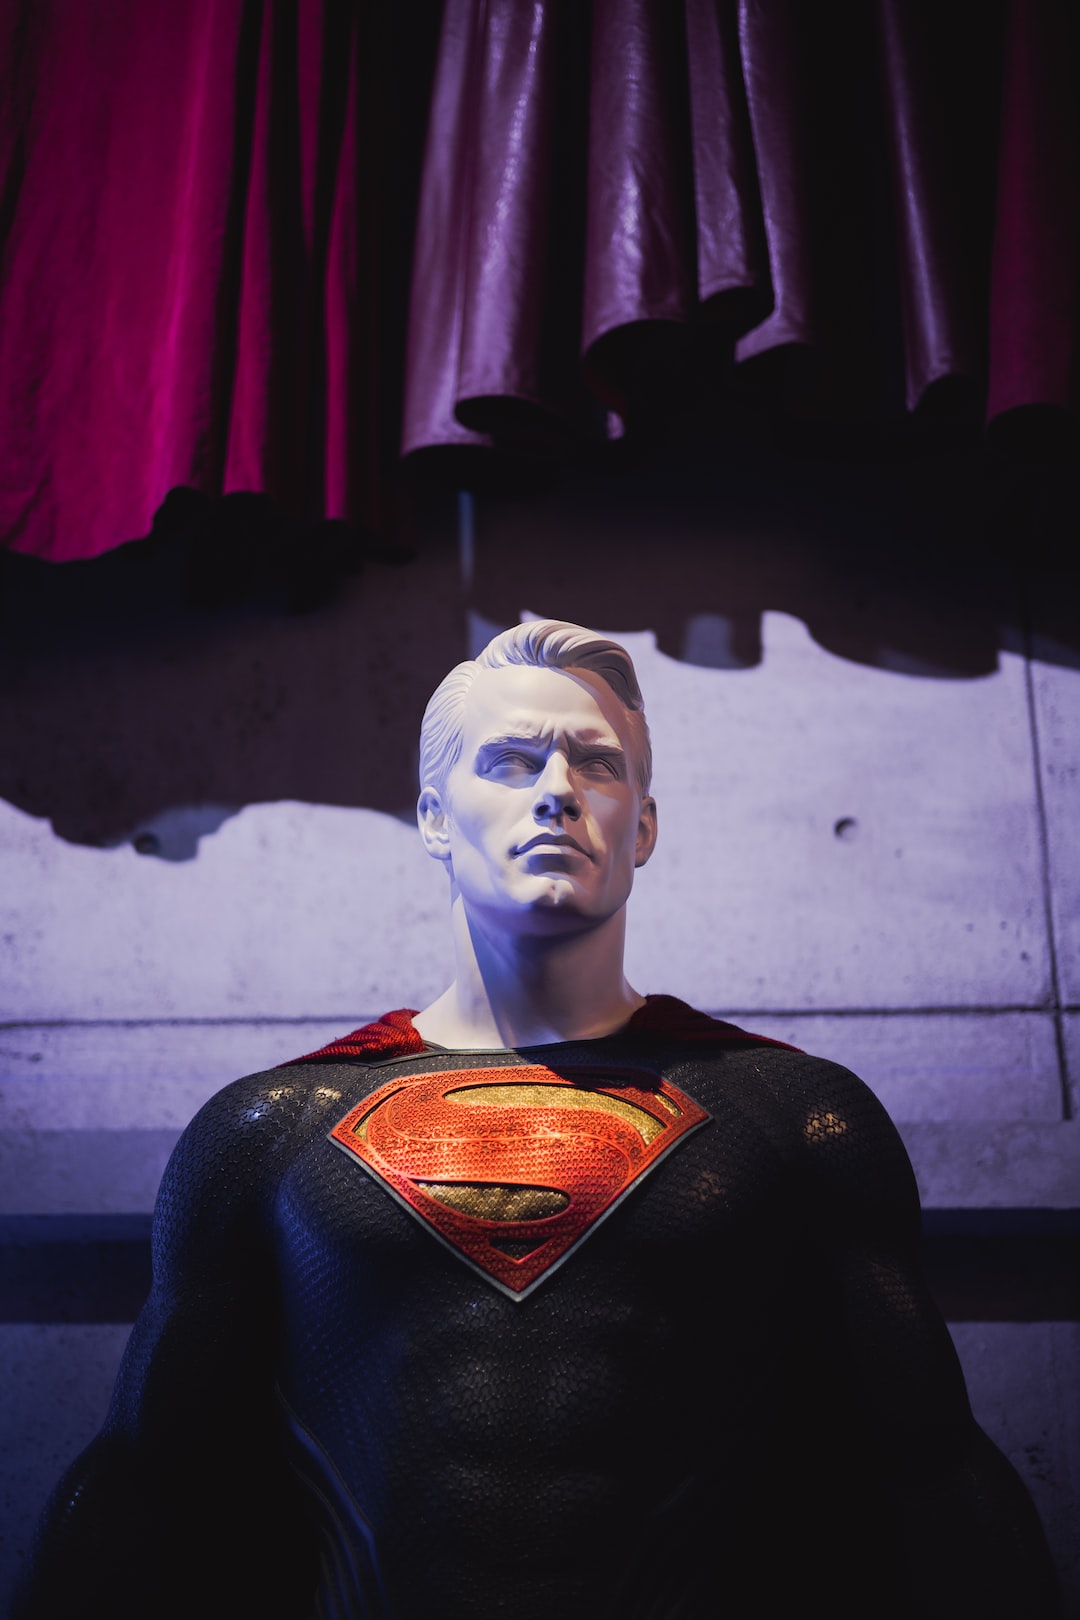 The Man of Steel: How Superman Changed the World of Superheroes Forever